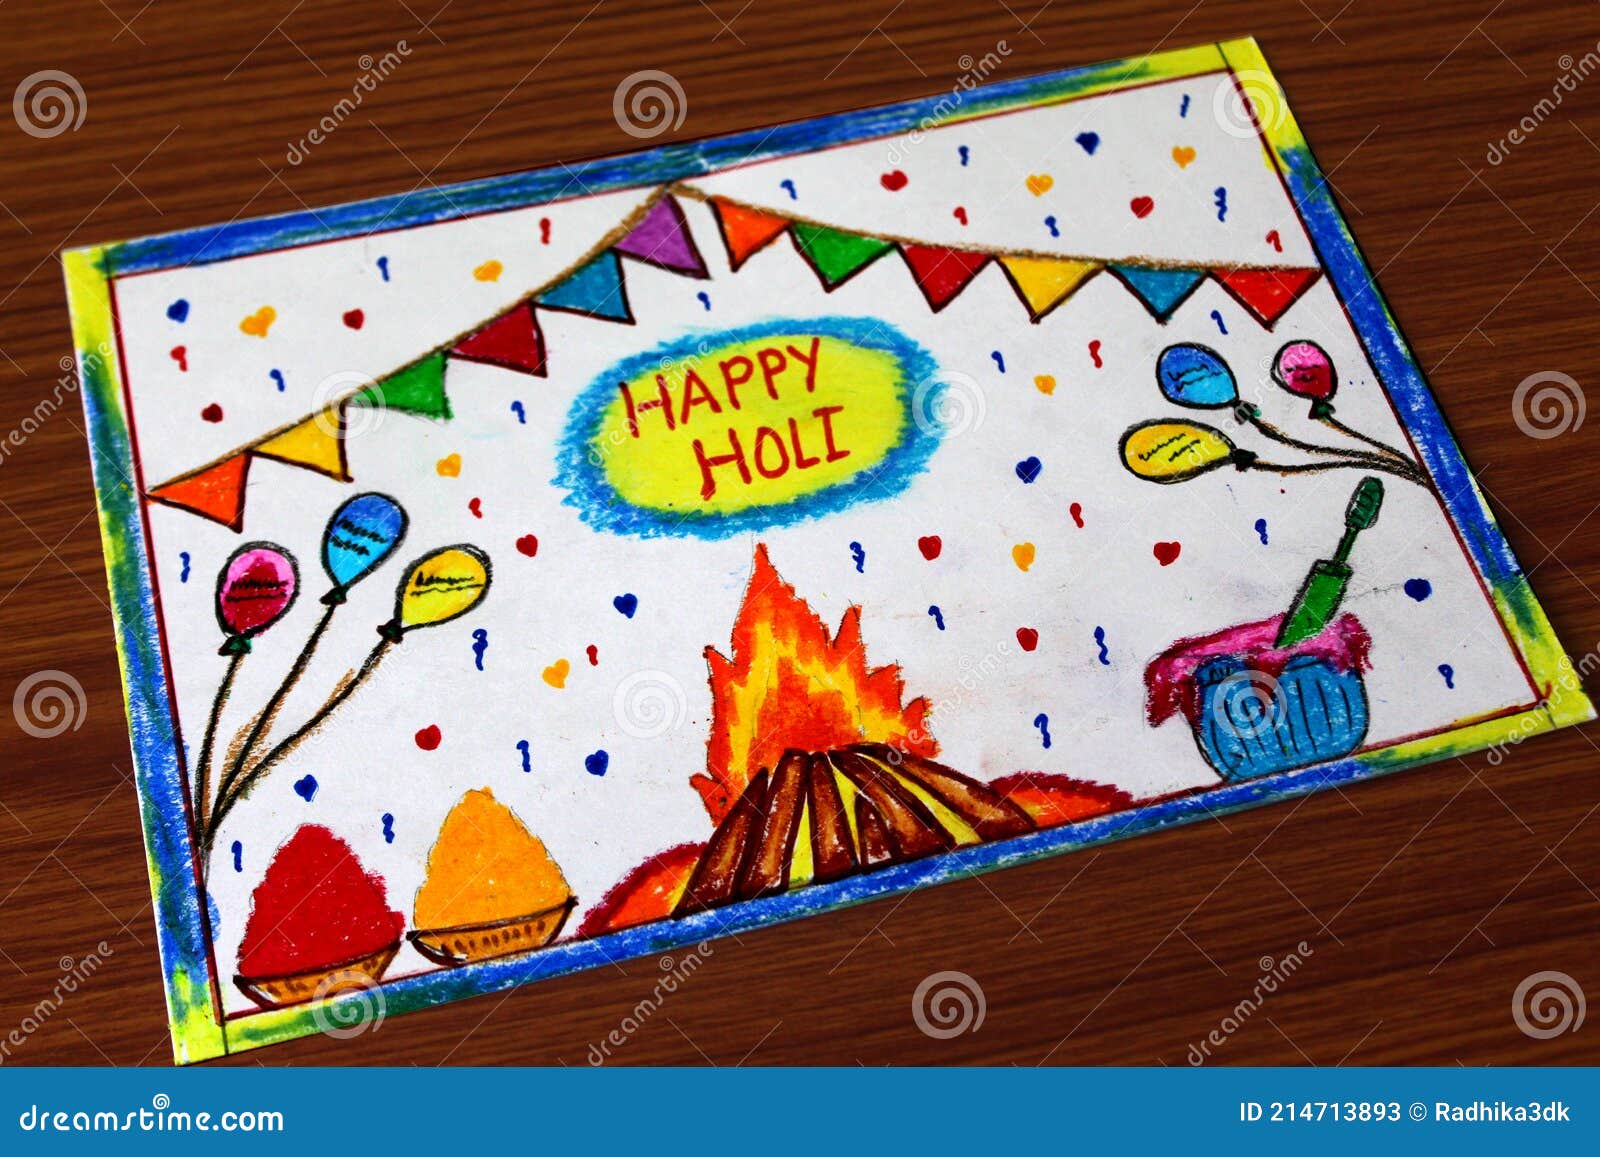 Happy Holi Abstract Painting Art Stock Image - Image of colorful ...